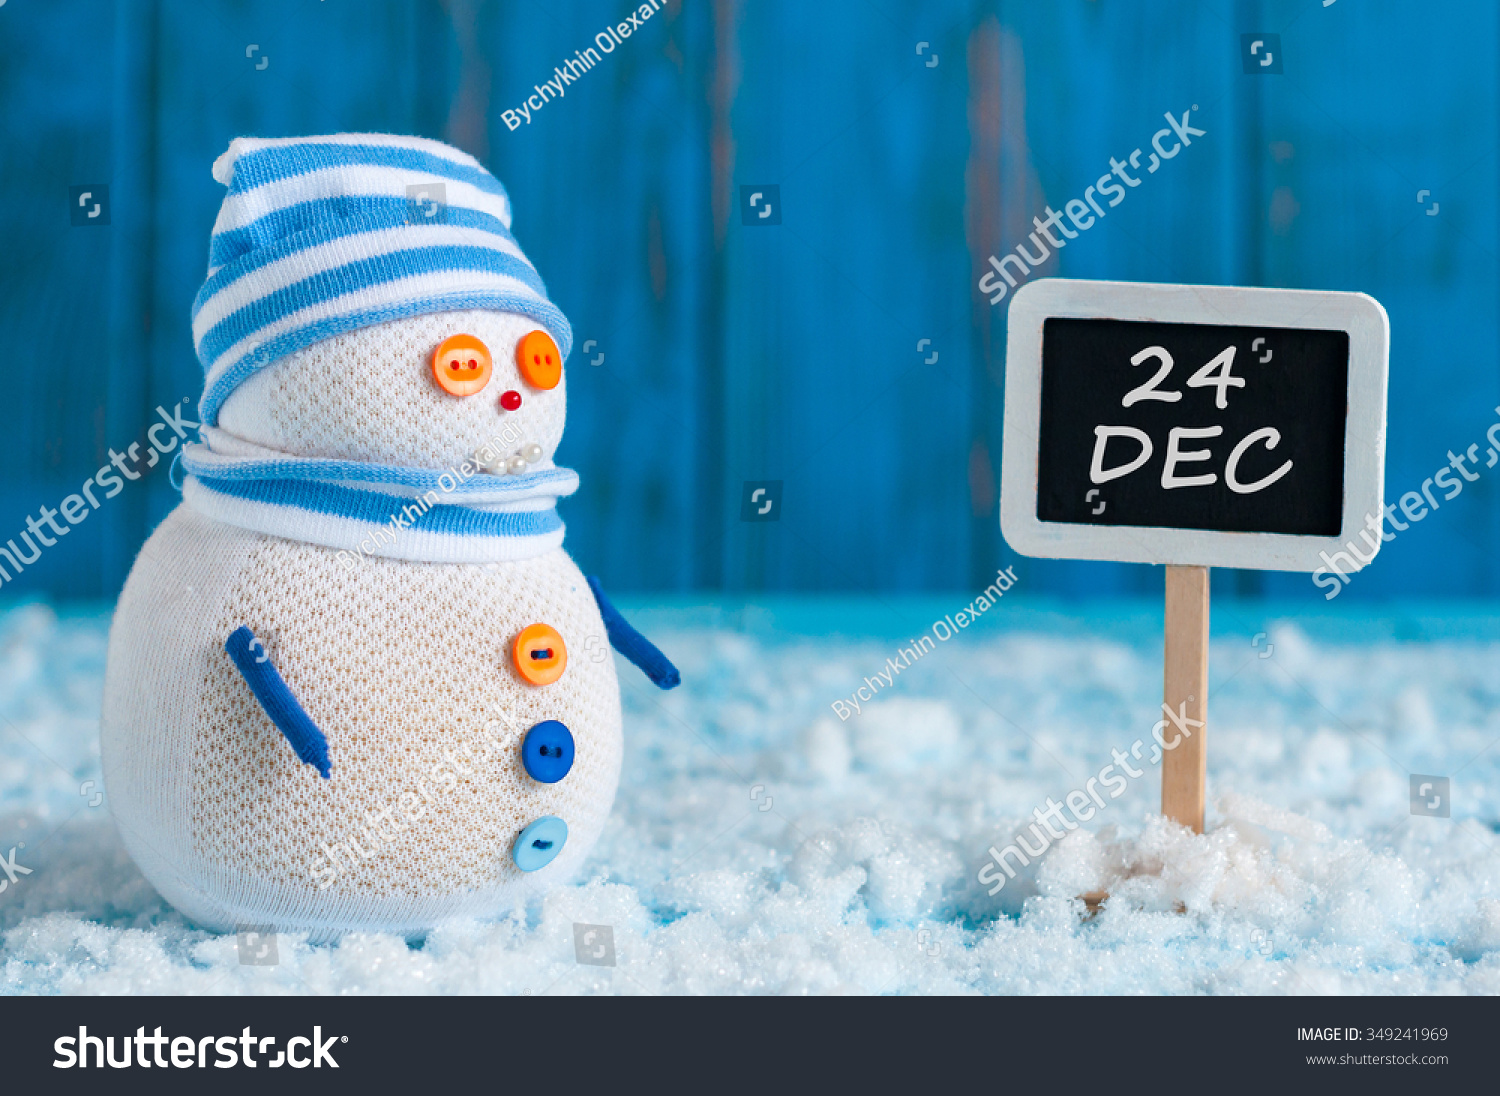 Christmas Eve Date On sign. December 24. Snowman near direction Sign. Xmas Decorations #349241969